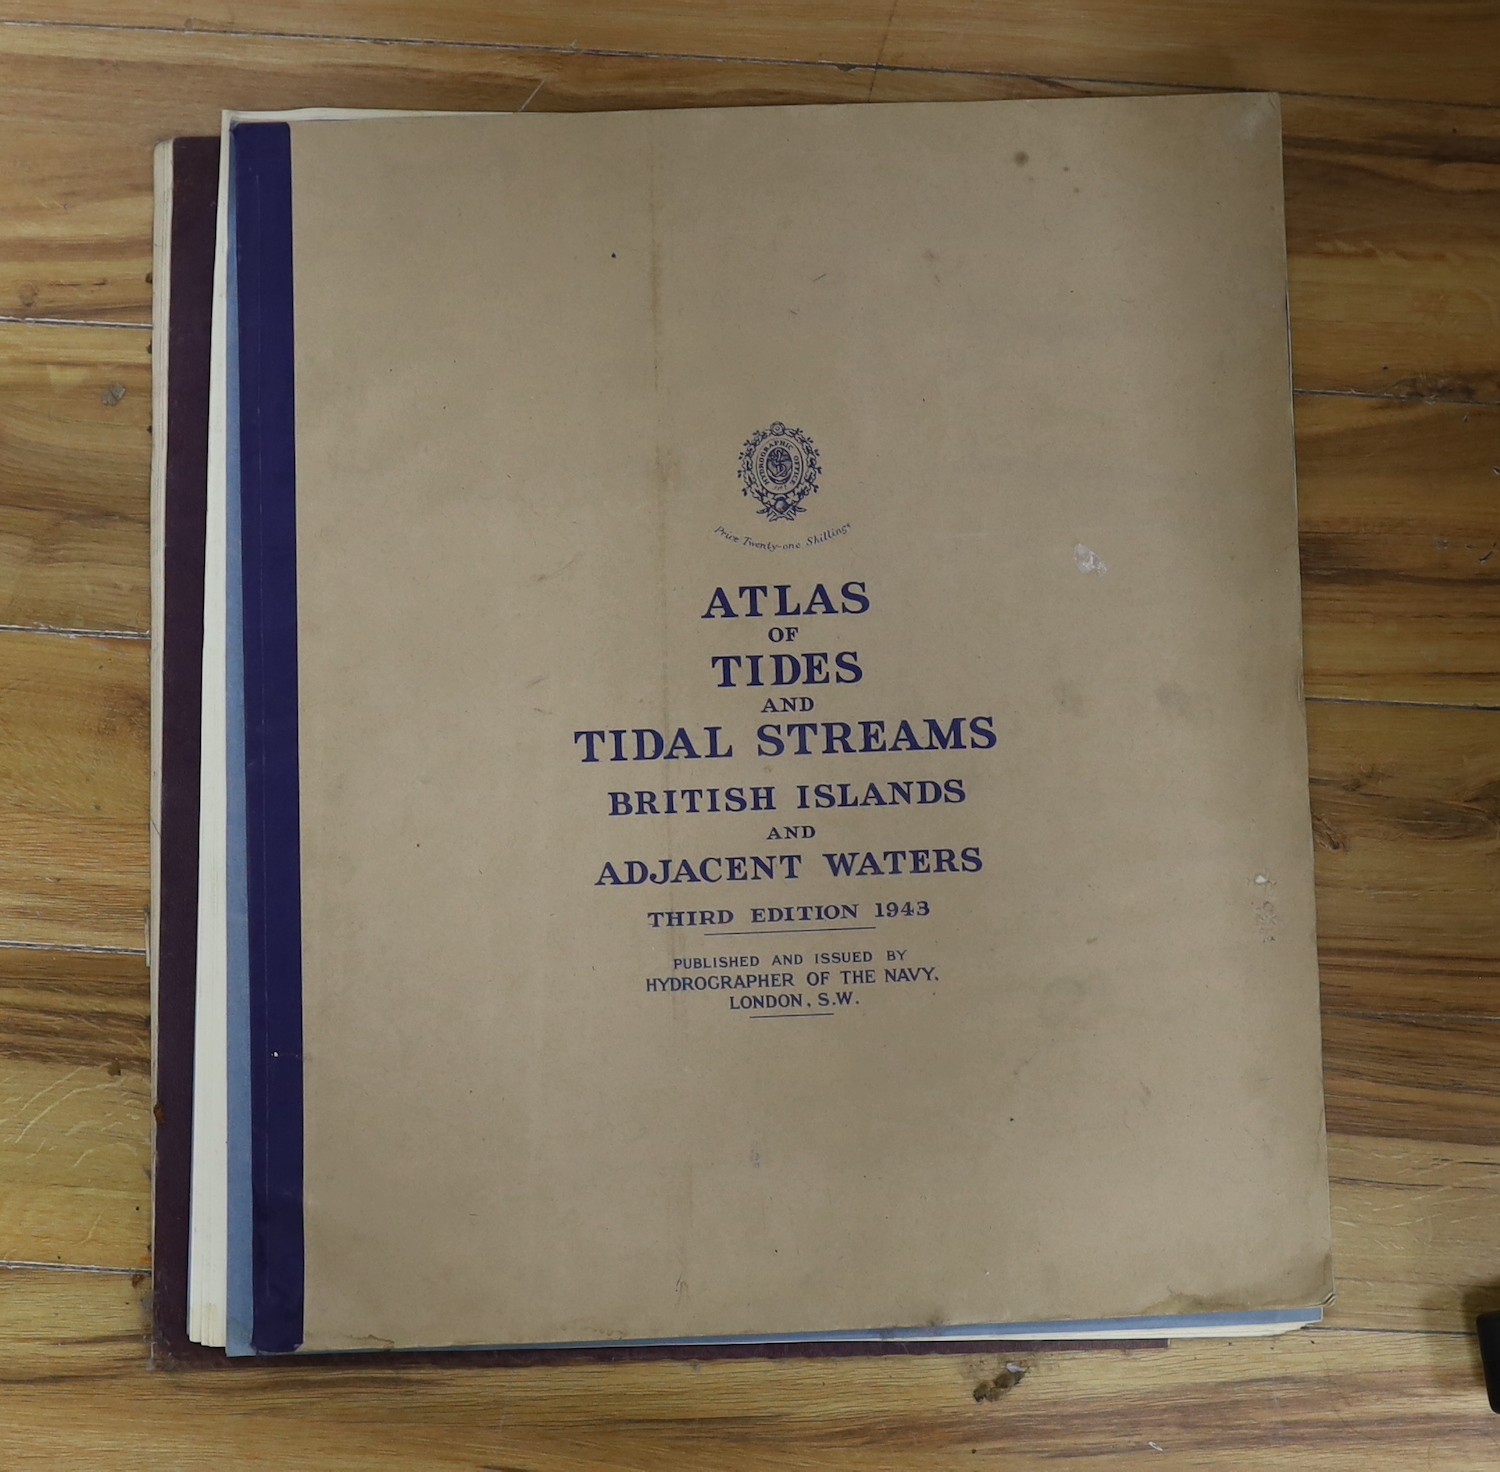 Three atlases of tidal streams British islands and adjacent waters